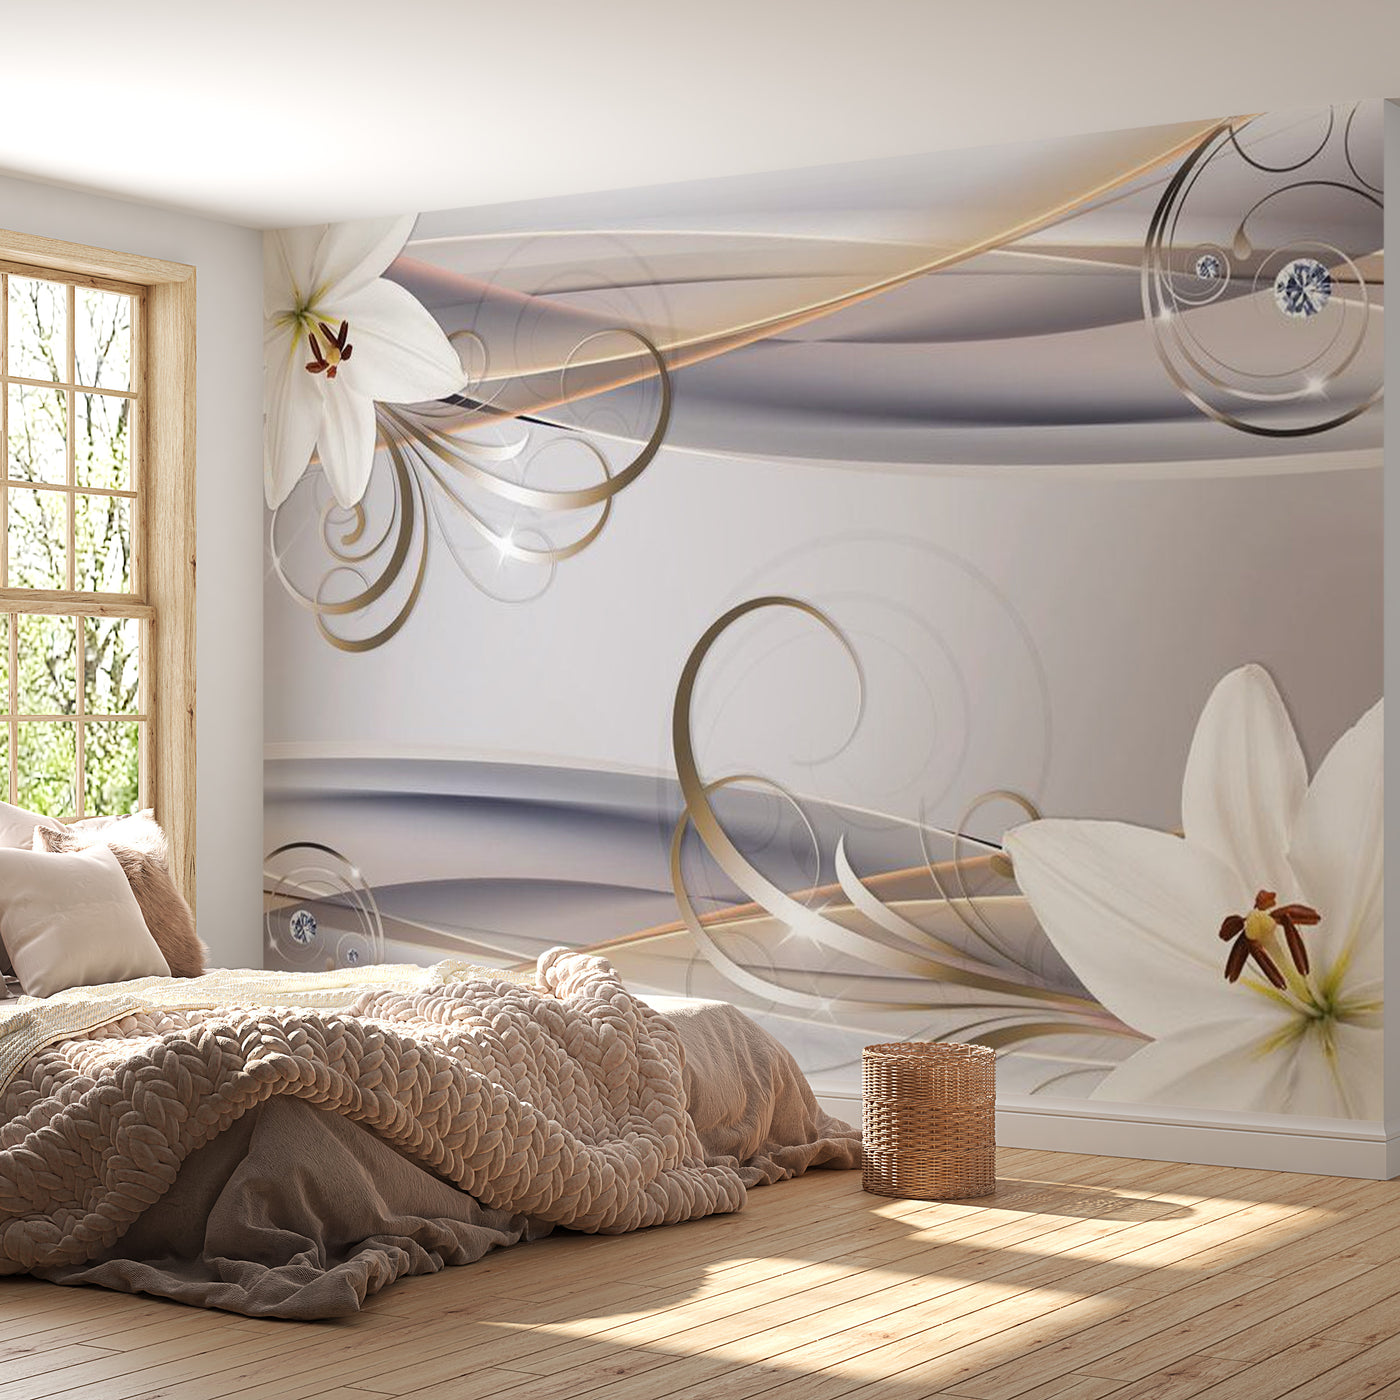 Peel & Stick Floral Wall Mural - Remember The Lilies - Removable Wall Decals